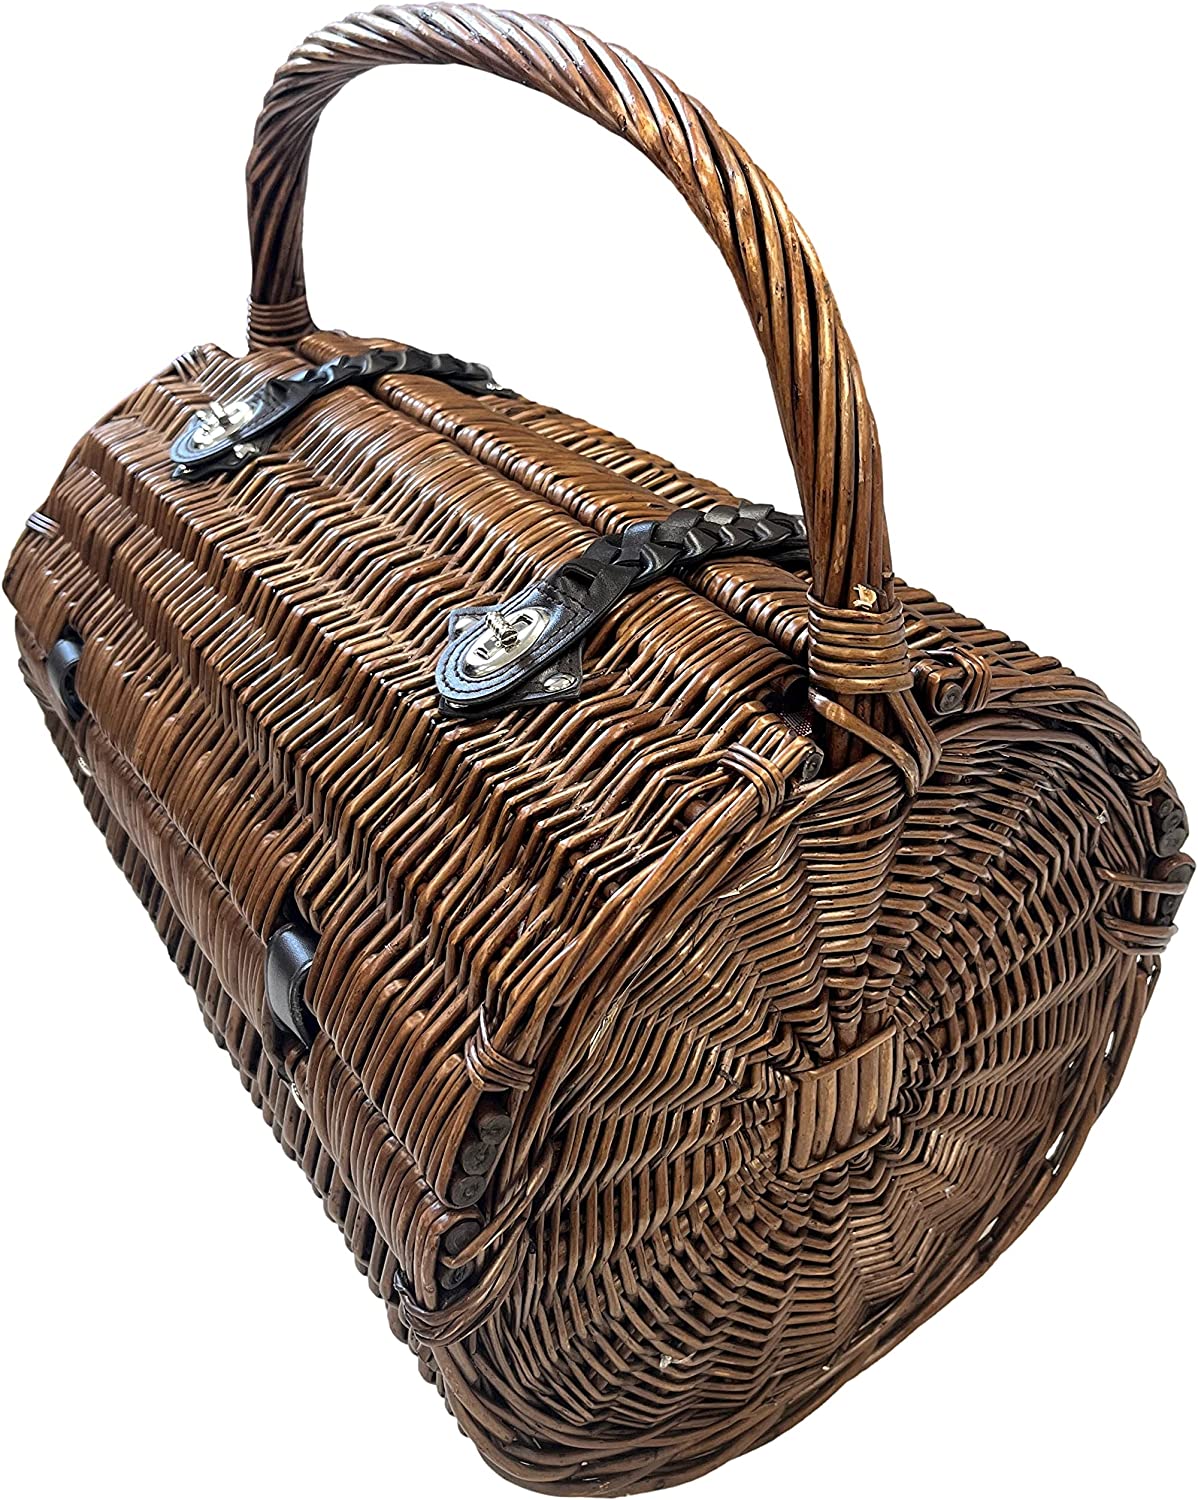 Deluxe Wicker Natural Mosaic Lining 2 Person Picnic Basket